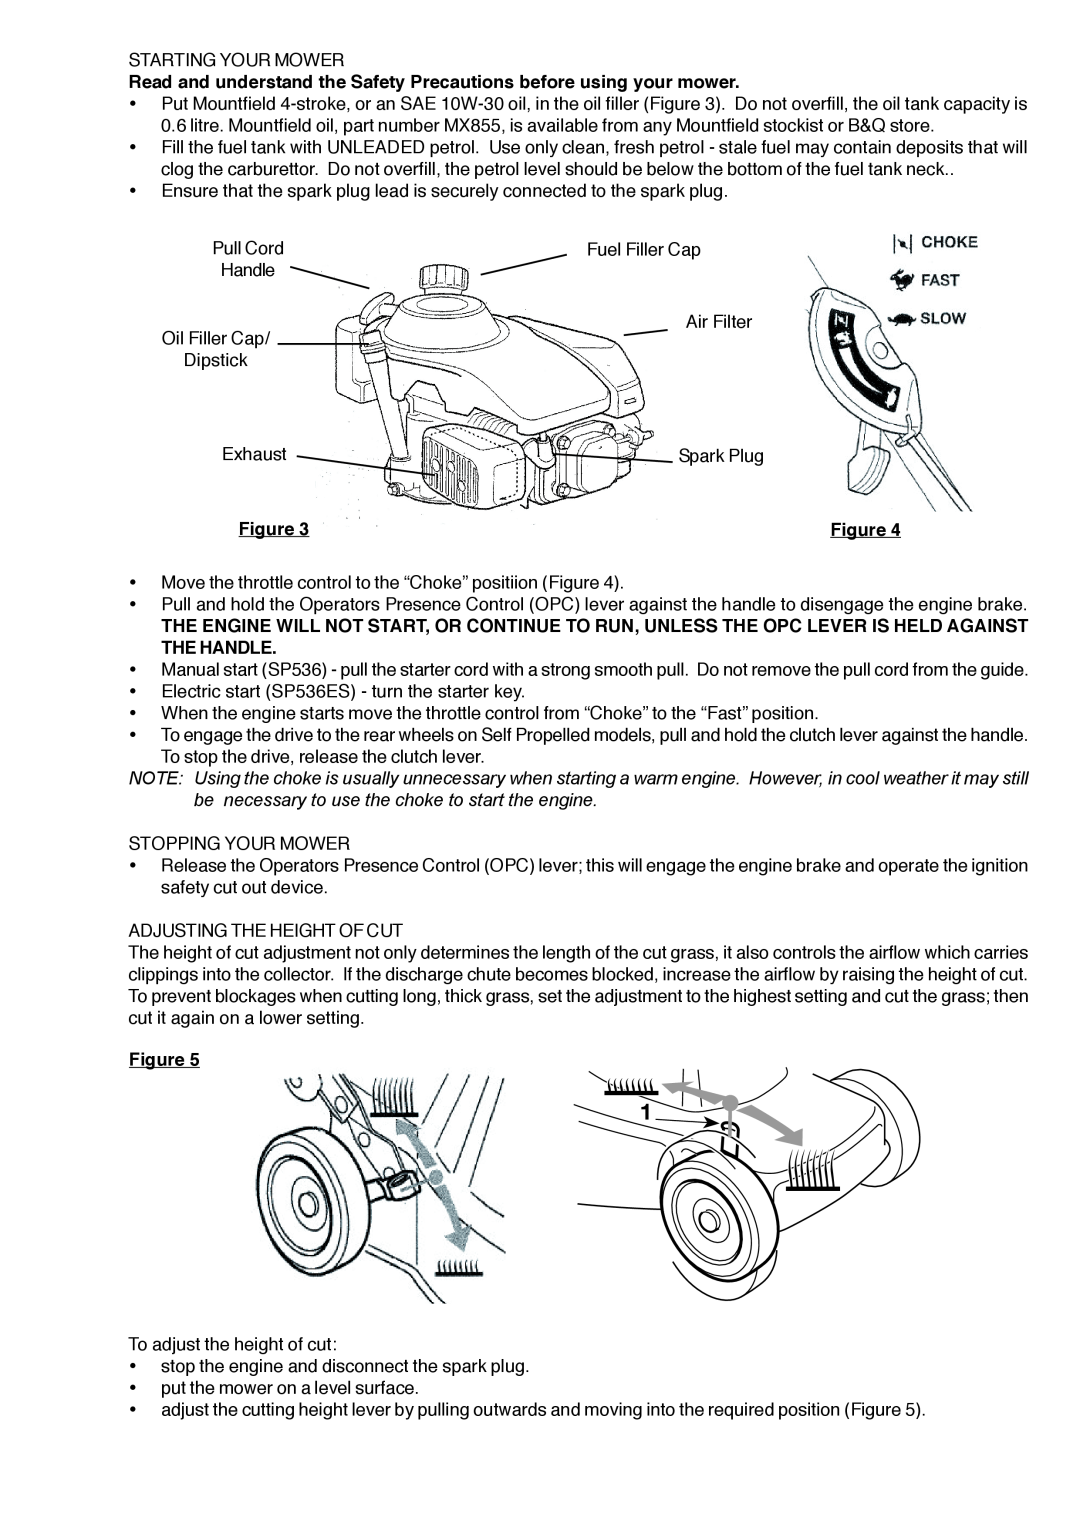 Mountfield SP536ES manual Read and understand the Safety Precautions before using your mower 